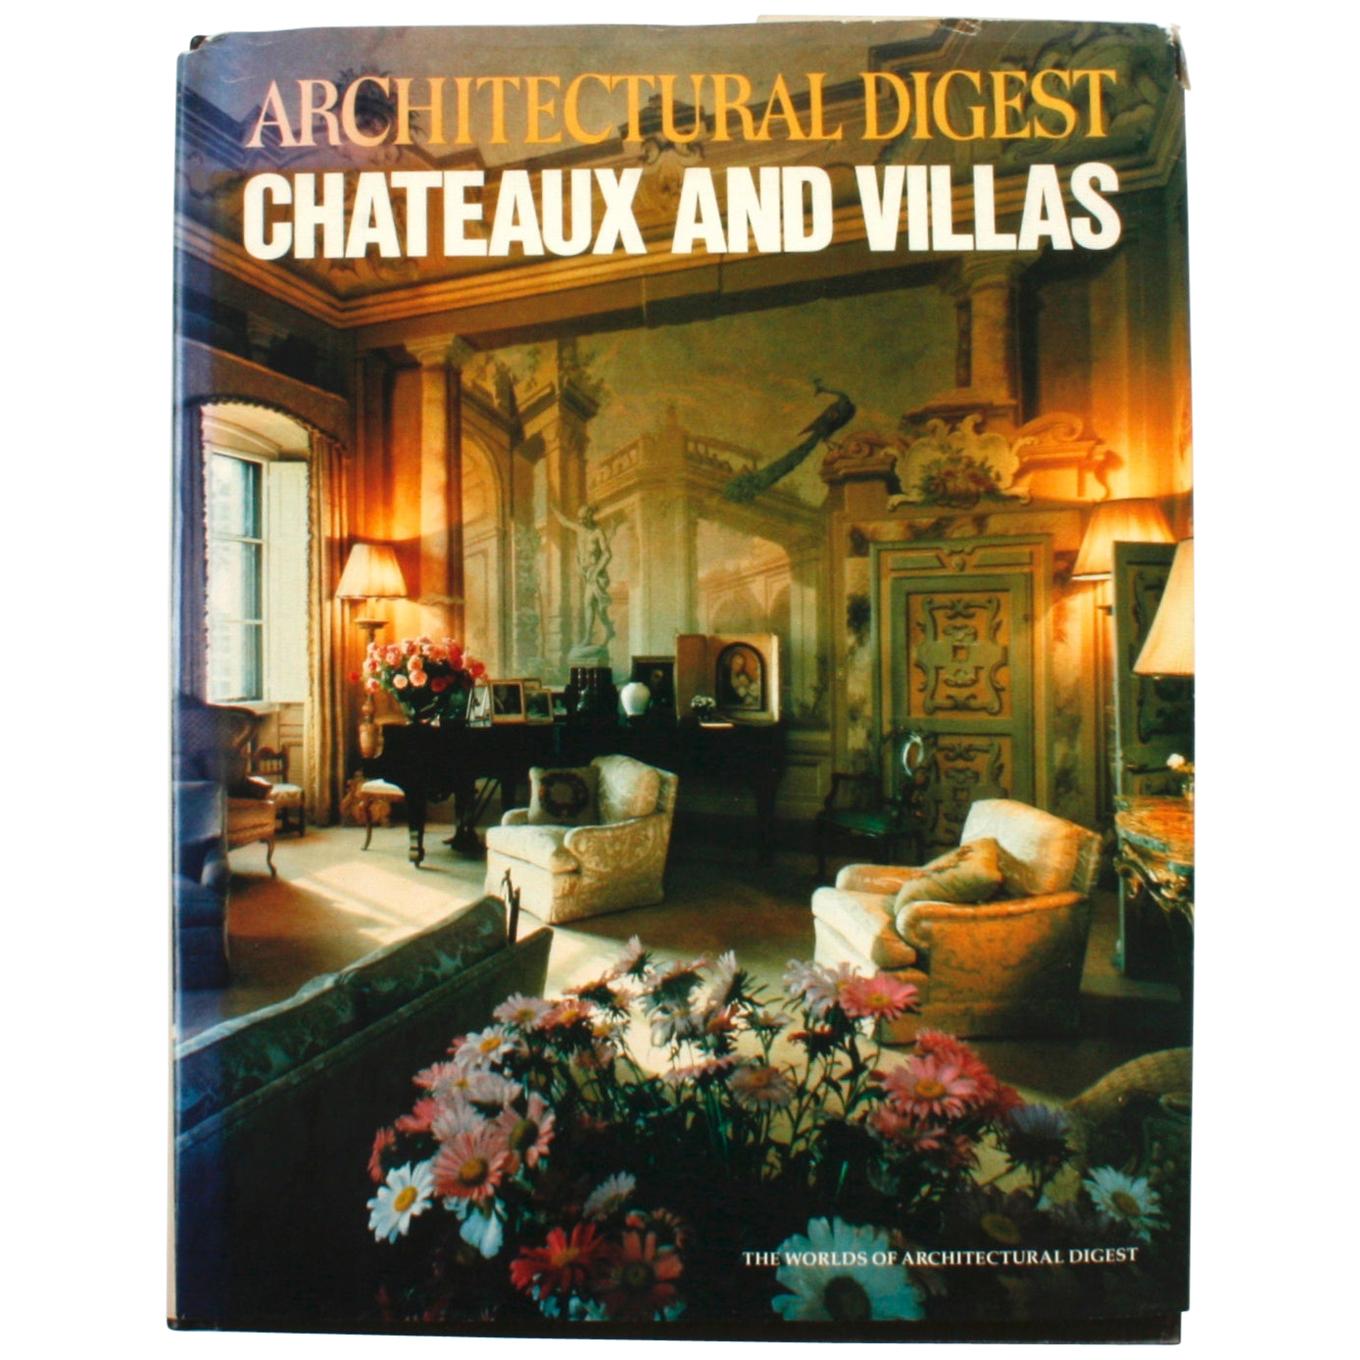 Architectural Digest Chateaux and Villas, Stated First Edition